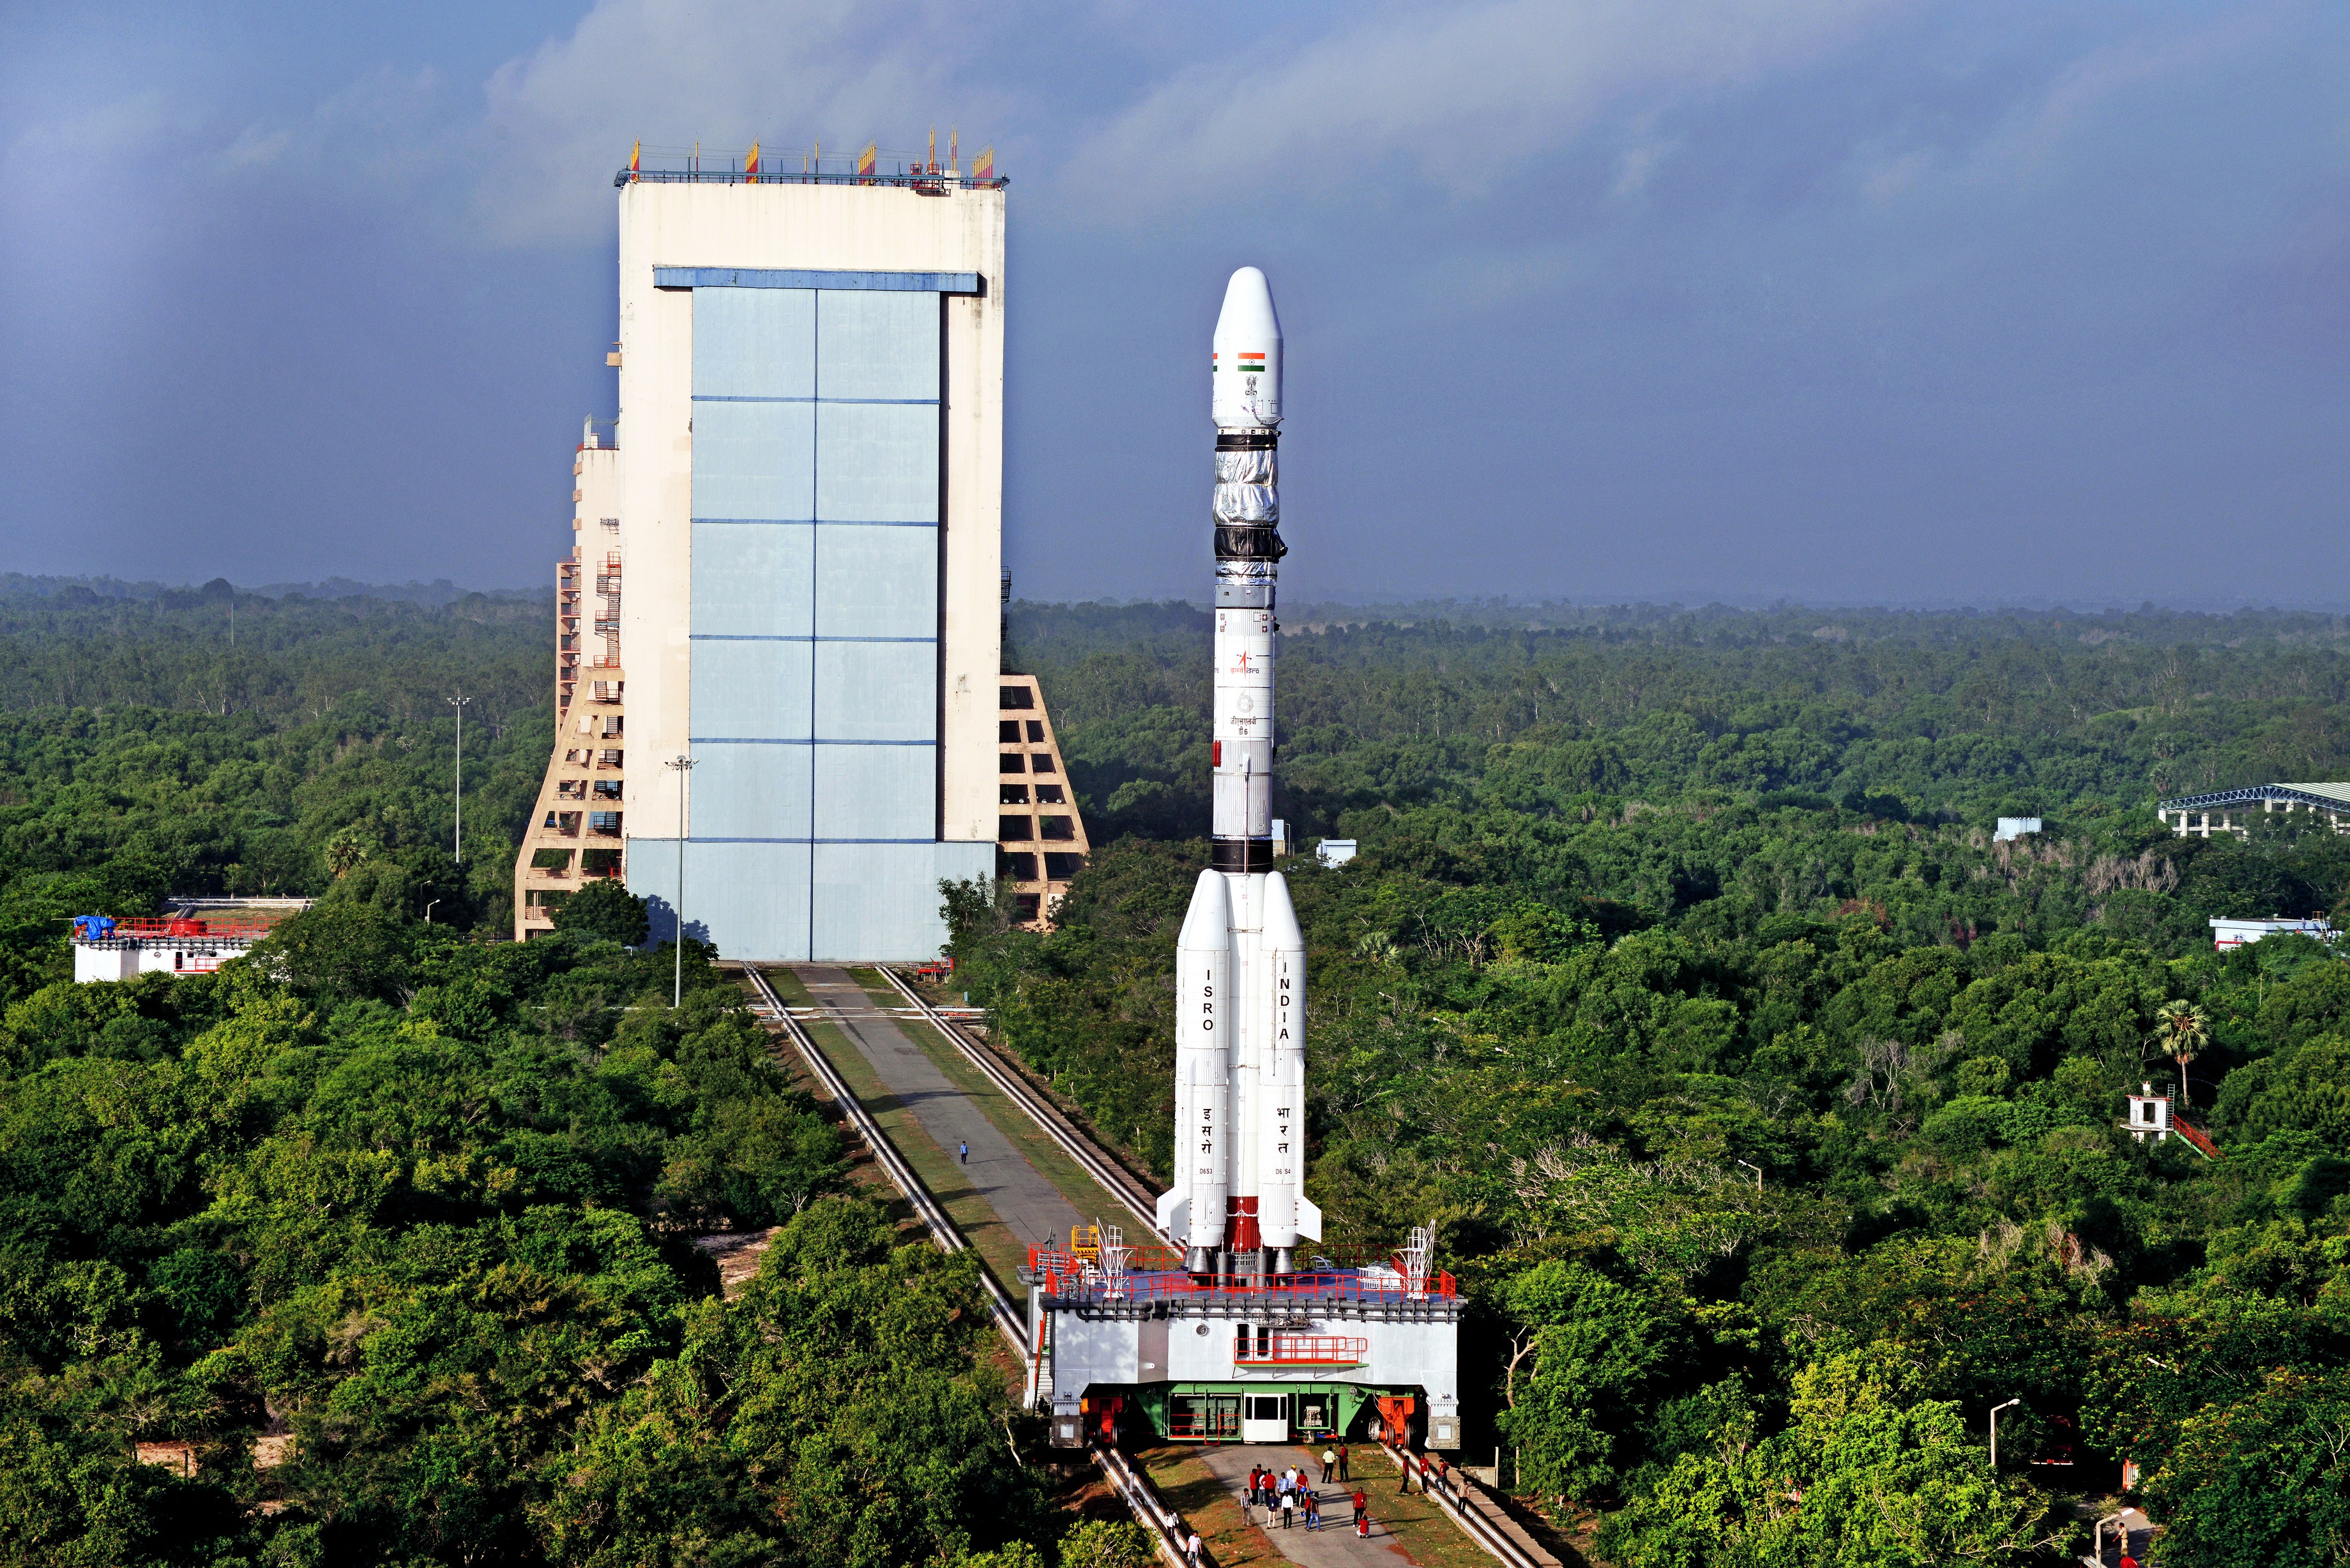 19gslv-d6-being-moved-vehicle-assembly-building-to-launch-pad